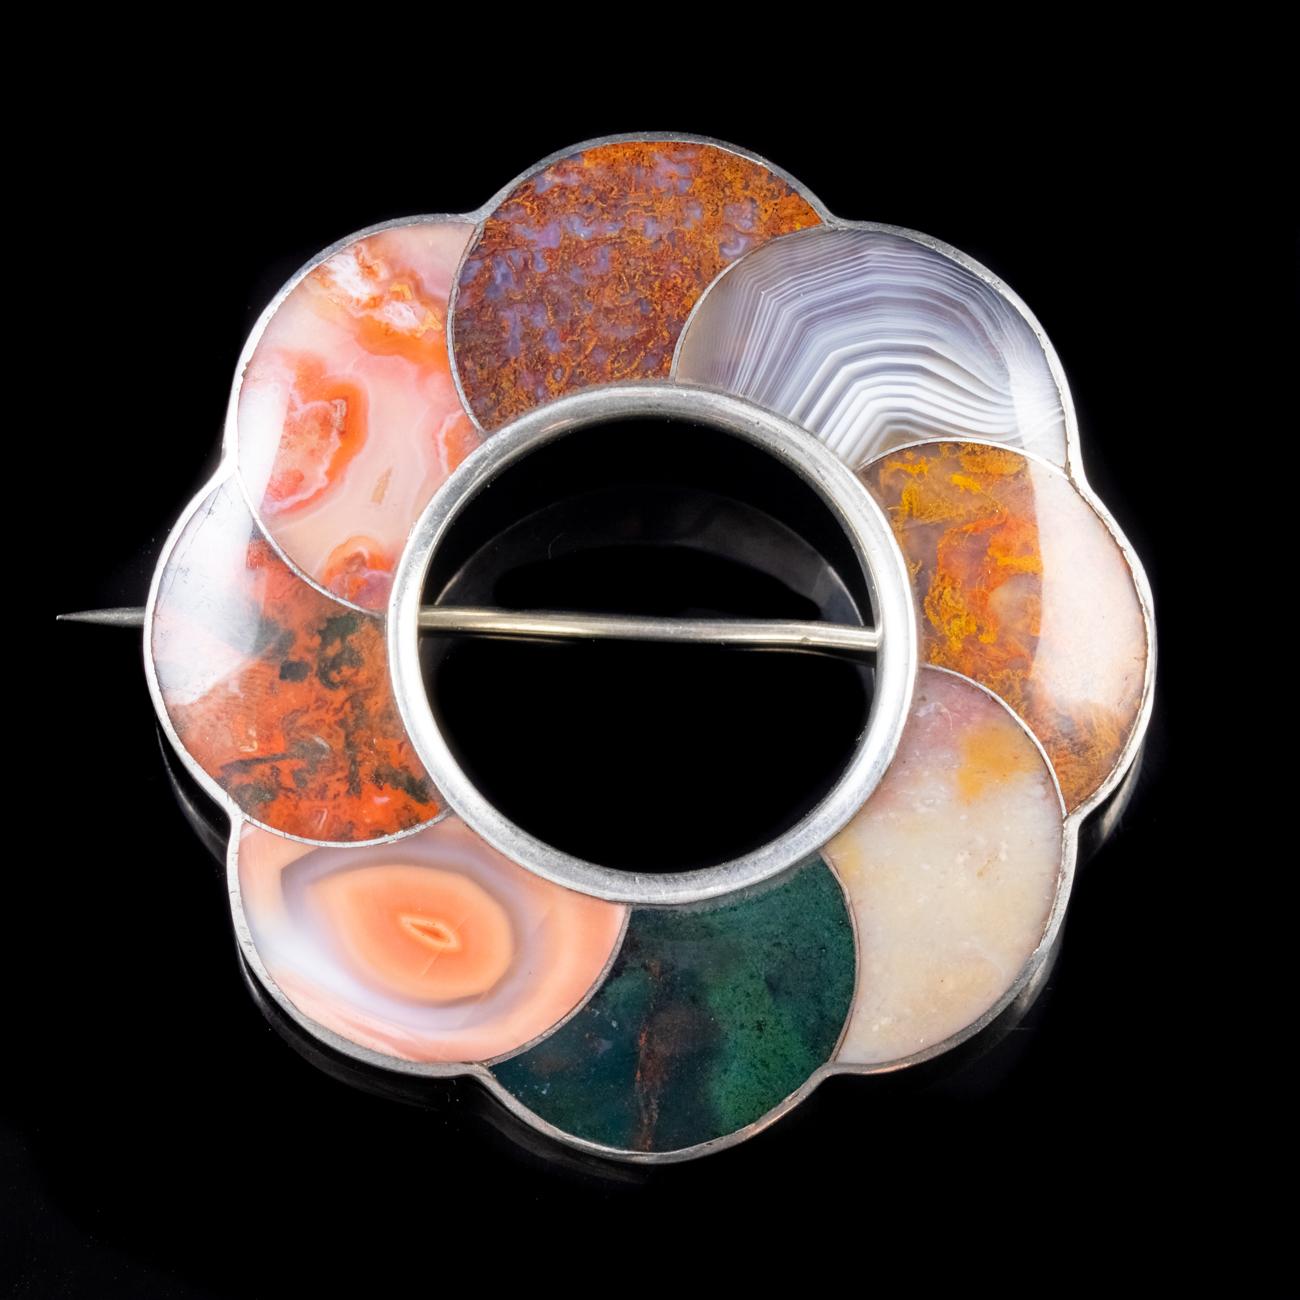 This truly stunning Antique Victorian Scottish brooch has been commissioned in Sterling Silver to form the shape of a flower and plaid set with eight magnificent examples of gorgeous Scottish agate.

Each Agate is unique and boasts various earthy